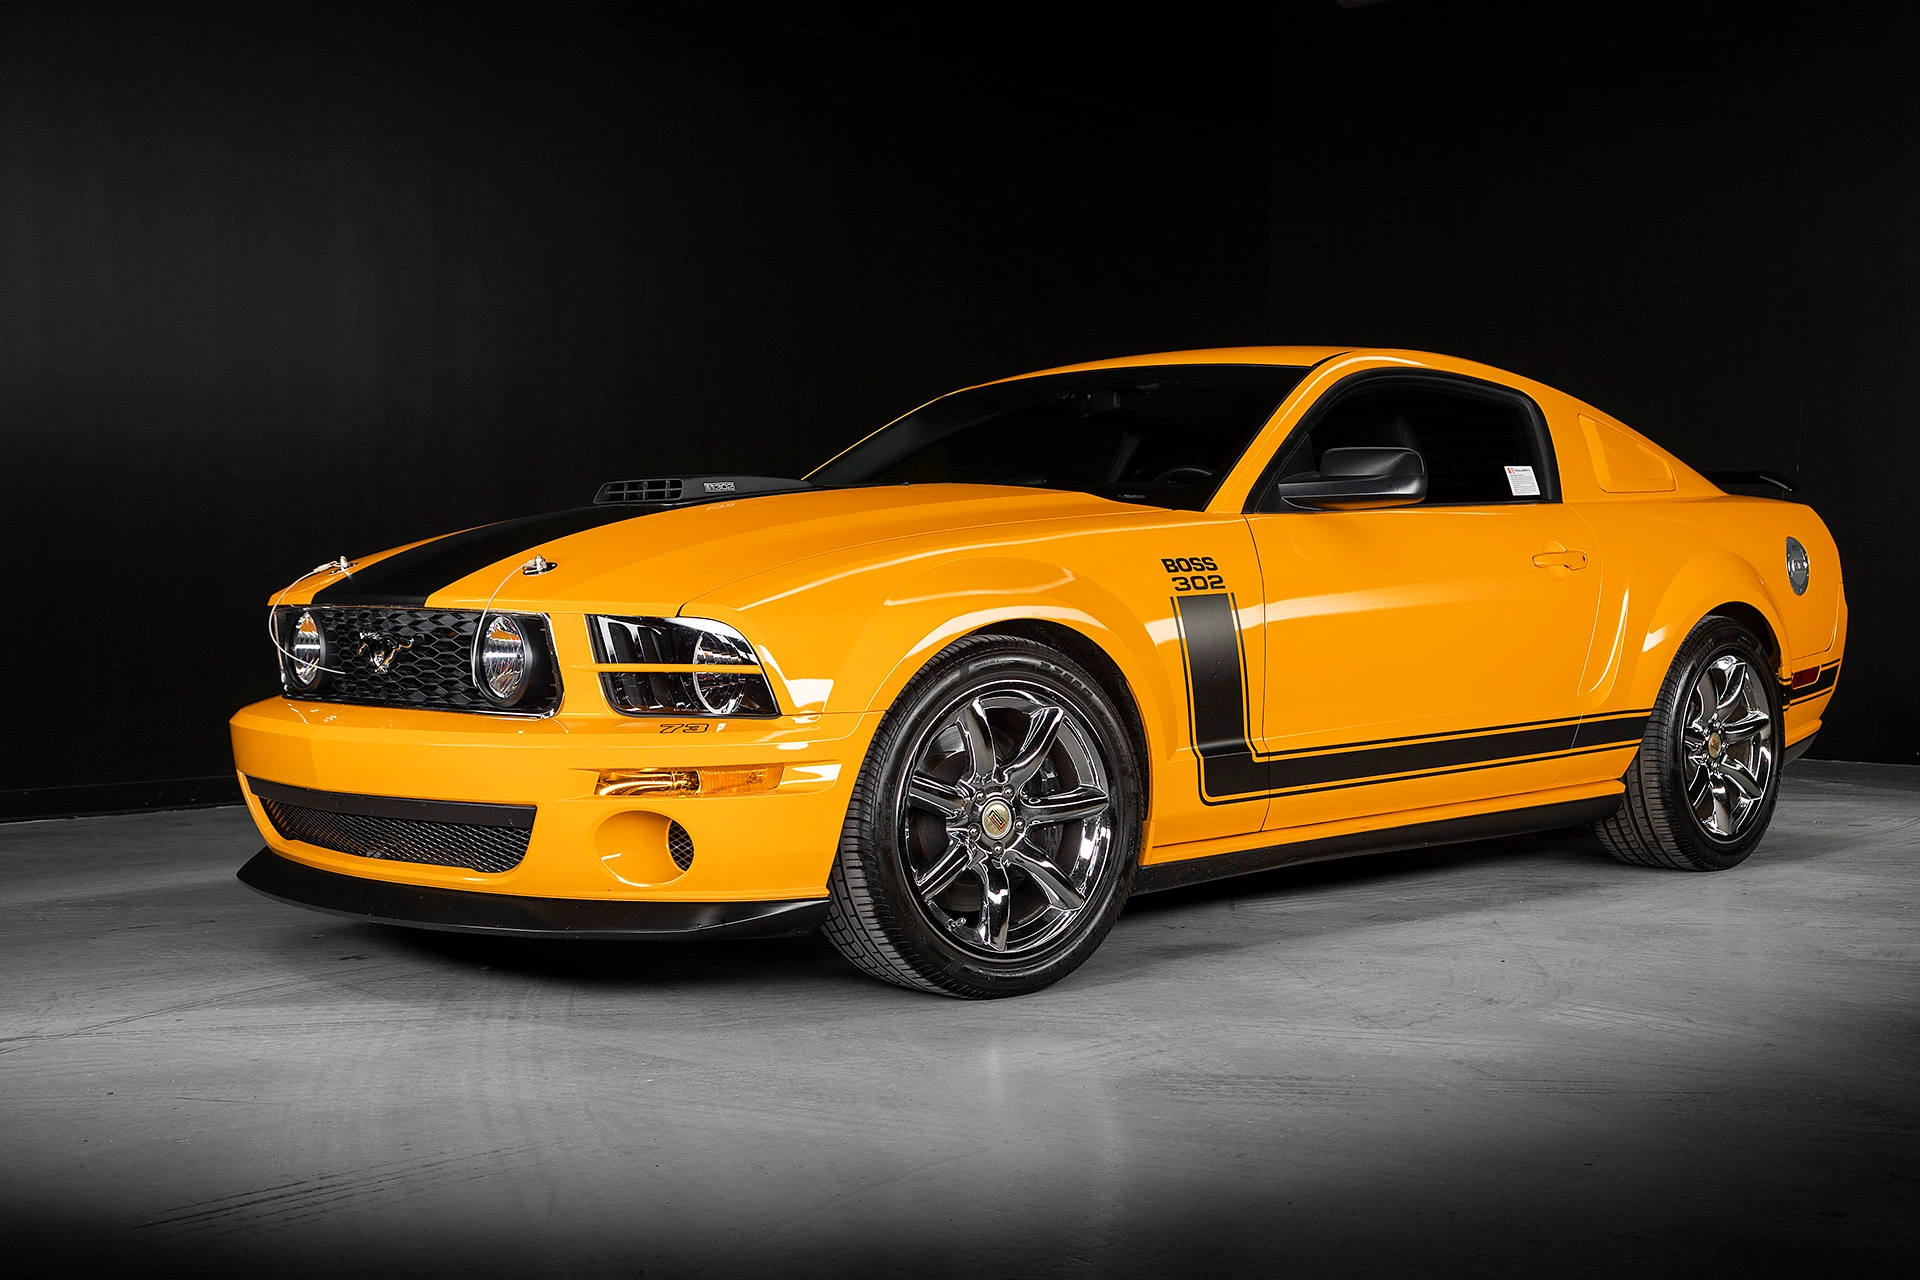 Mustang Of The Day: 2007 Ford Mustang Saleen Parnelli Jones Edition